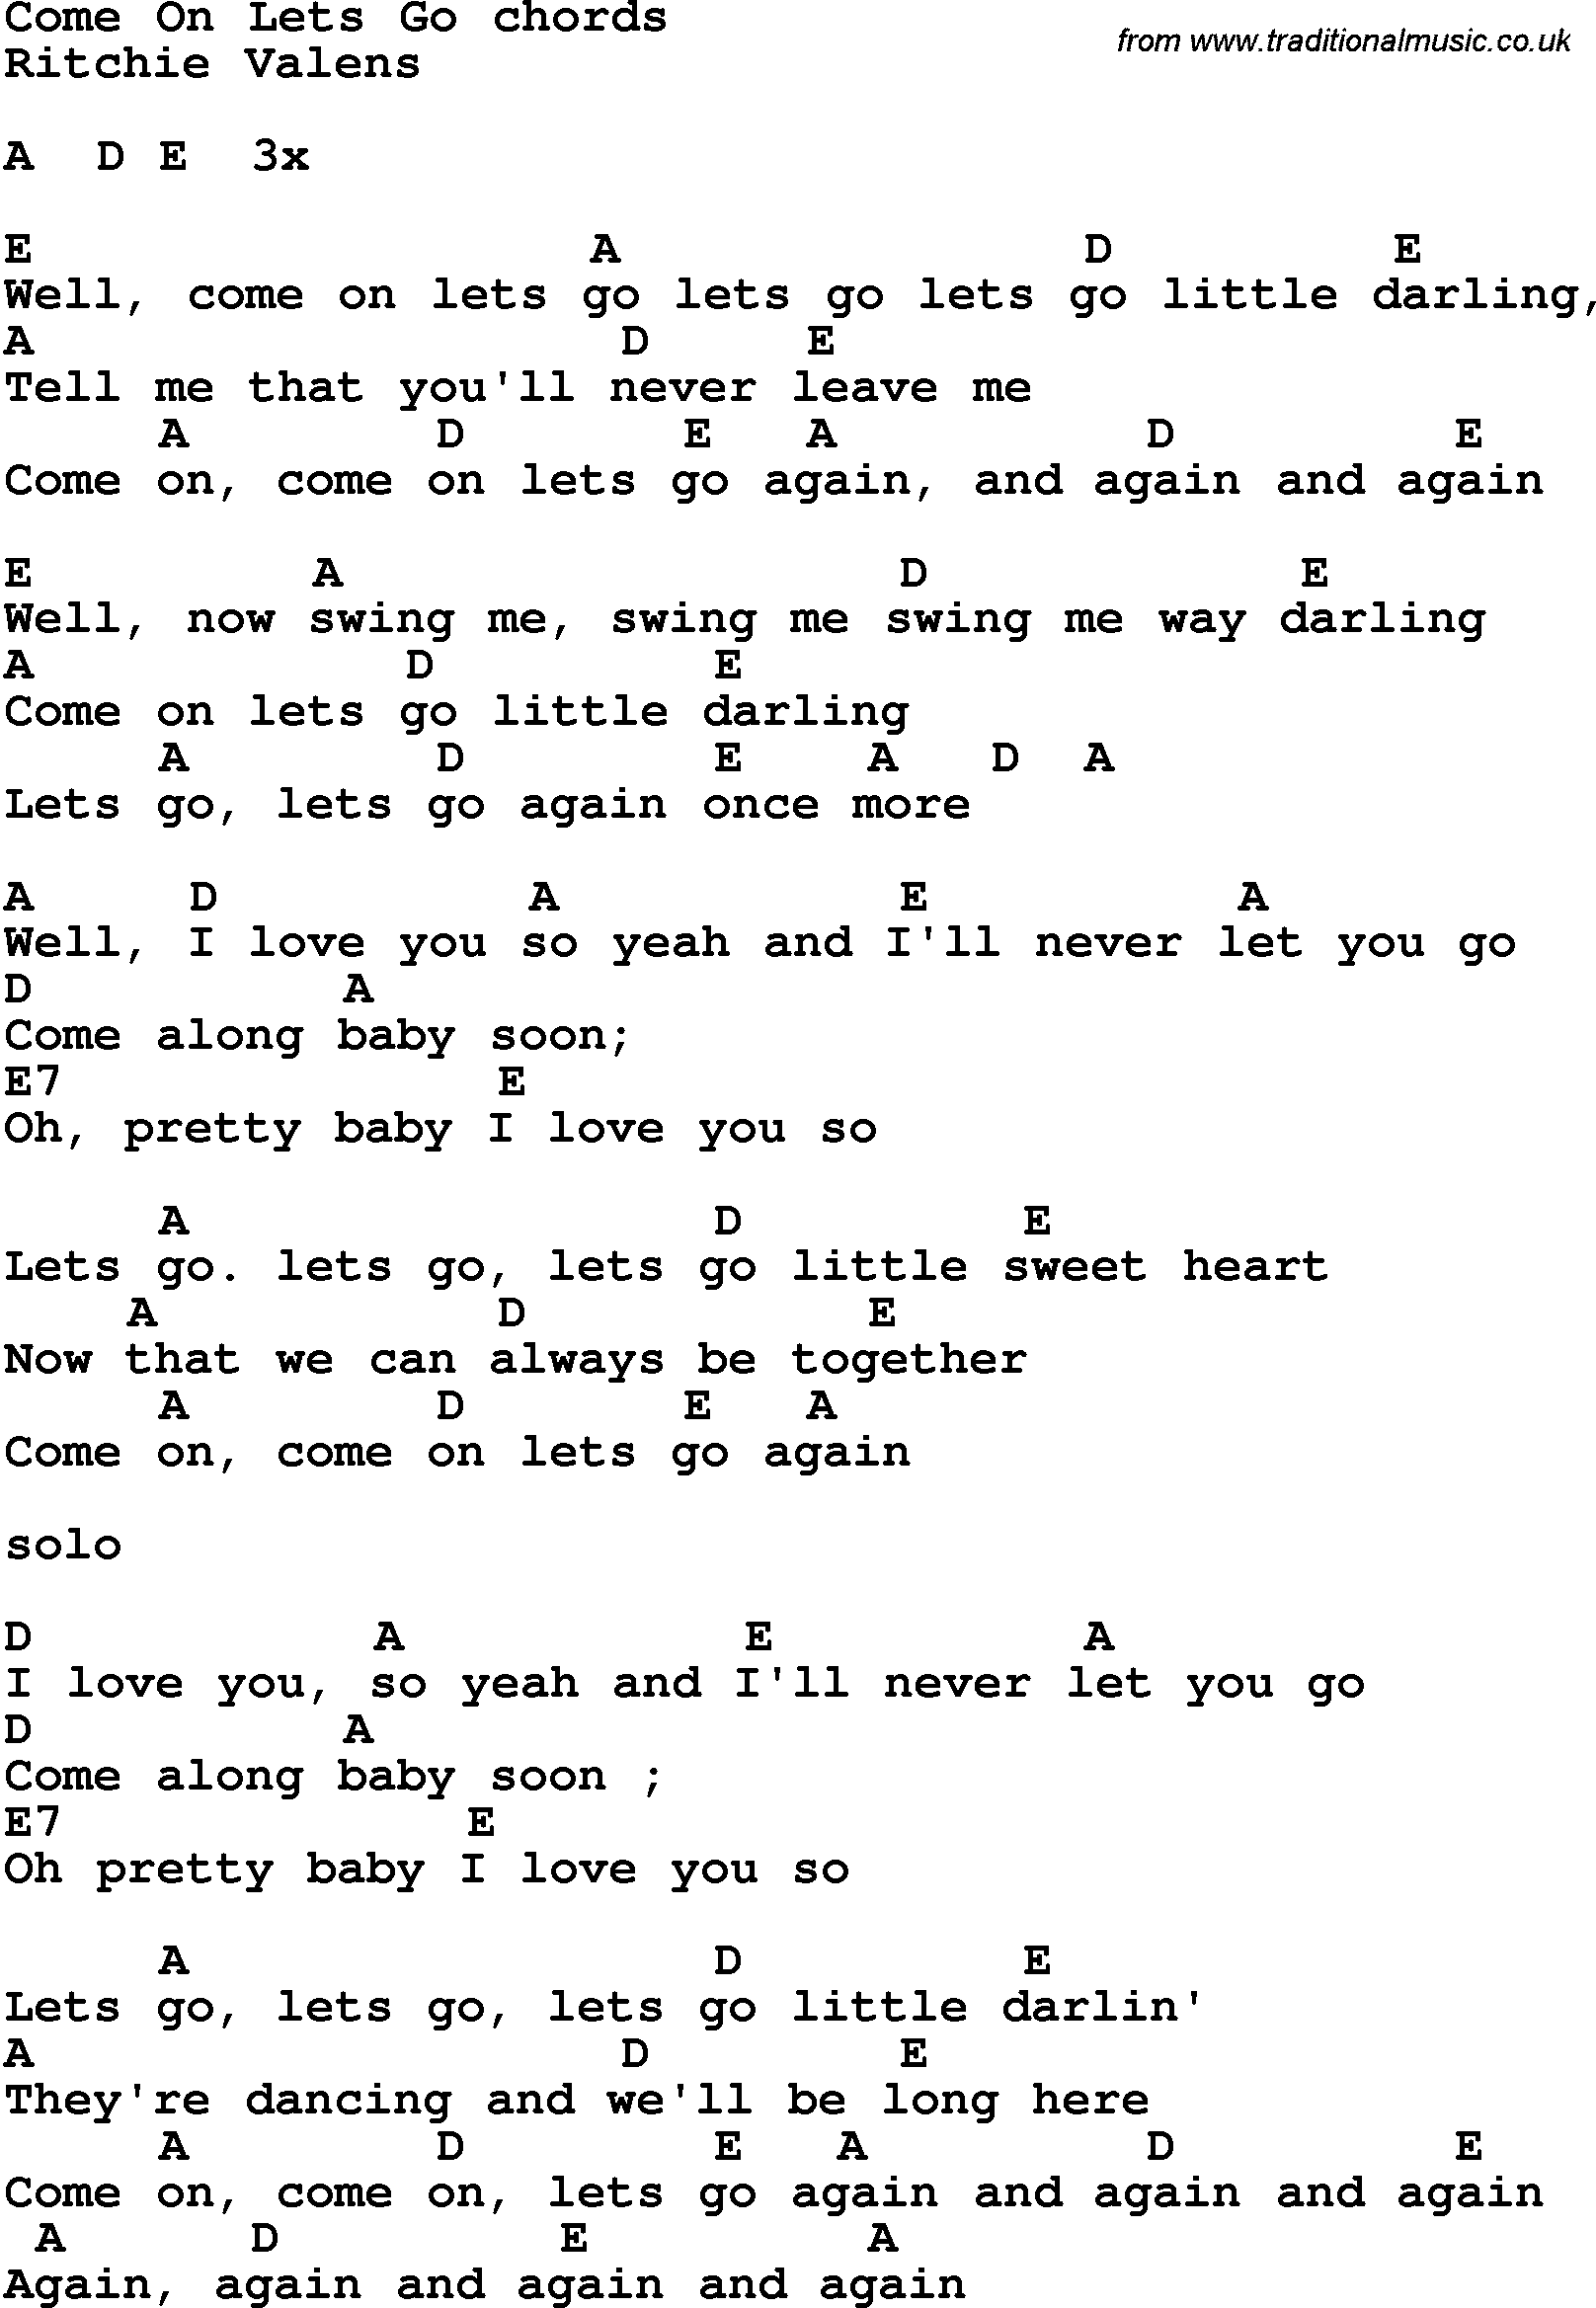 Song Lyrics with guitar chords for Come On Lets Go